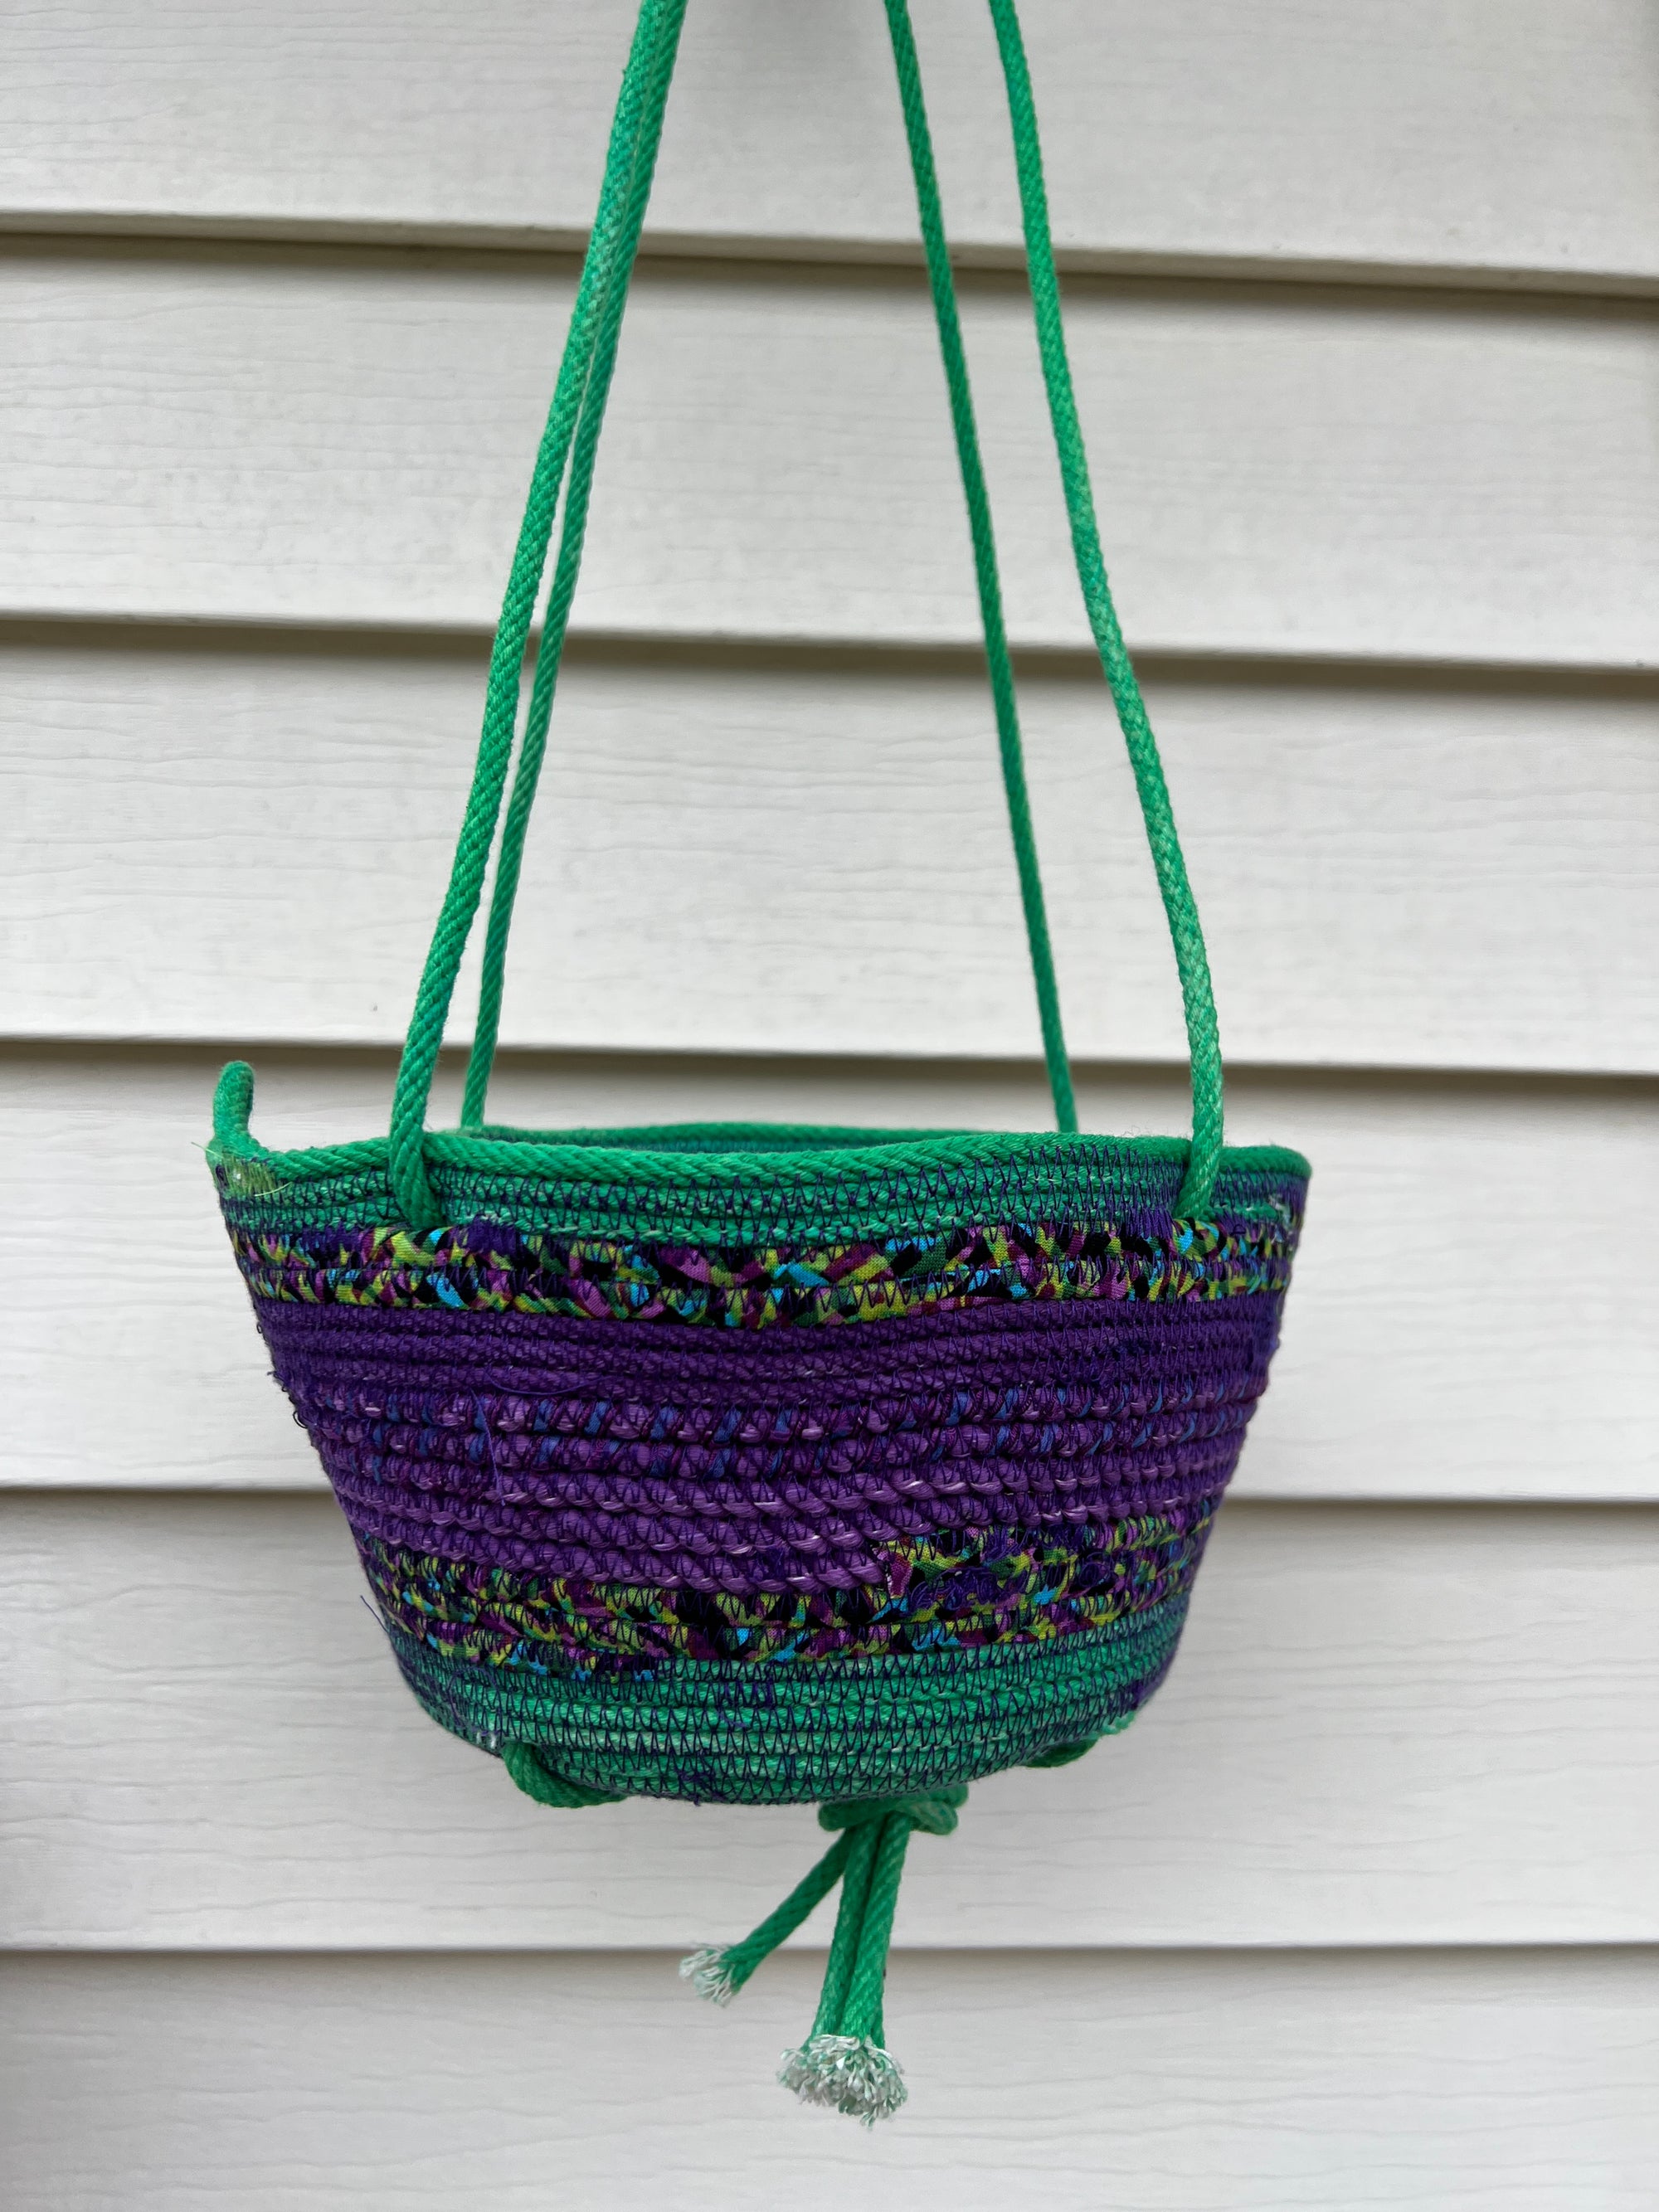 Hanging 6" Planter - Coiled Rope Basket Purple and Green